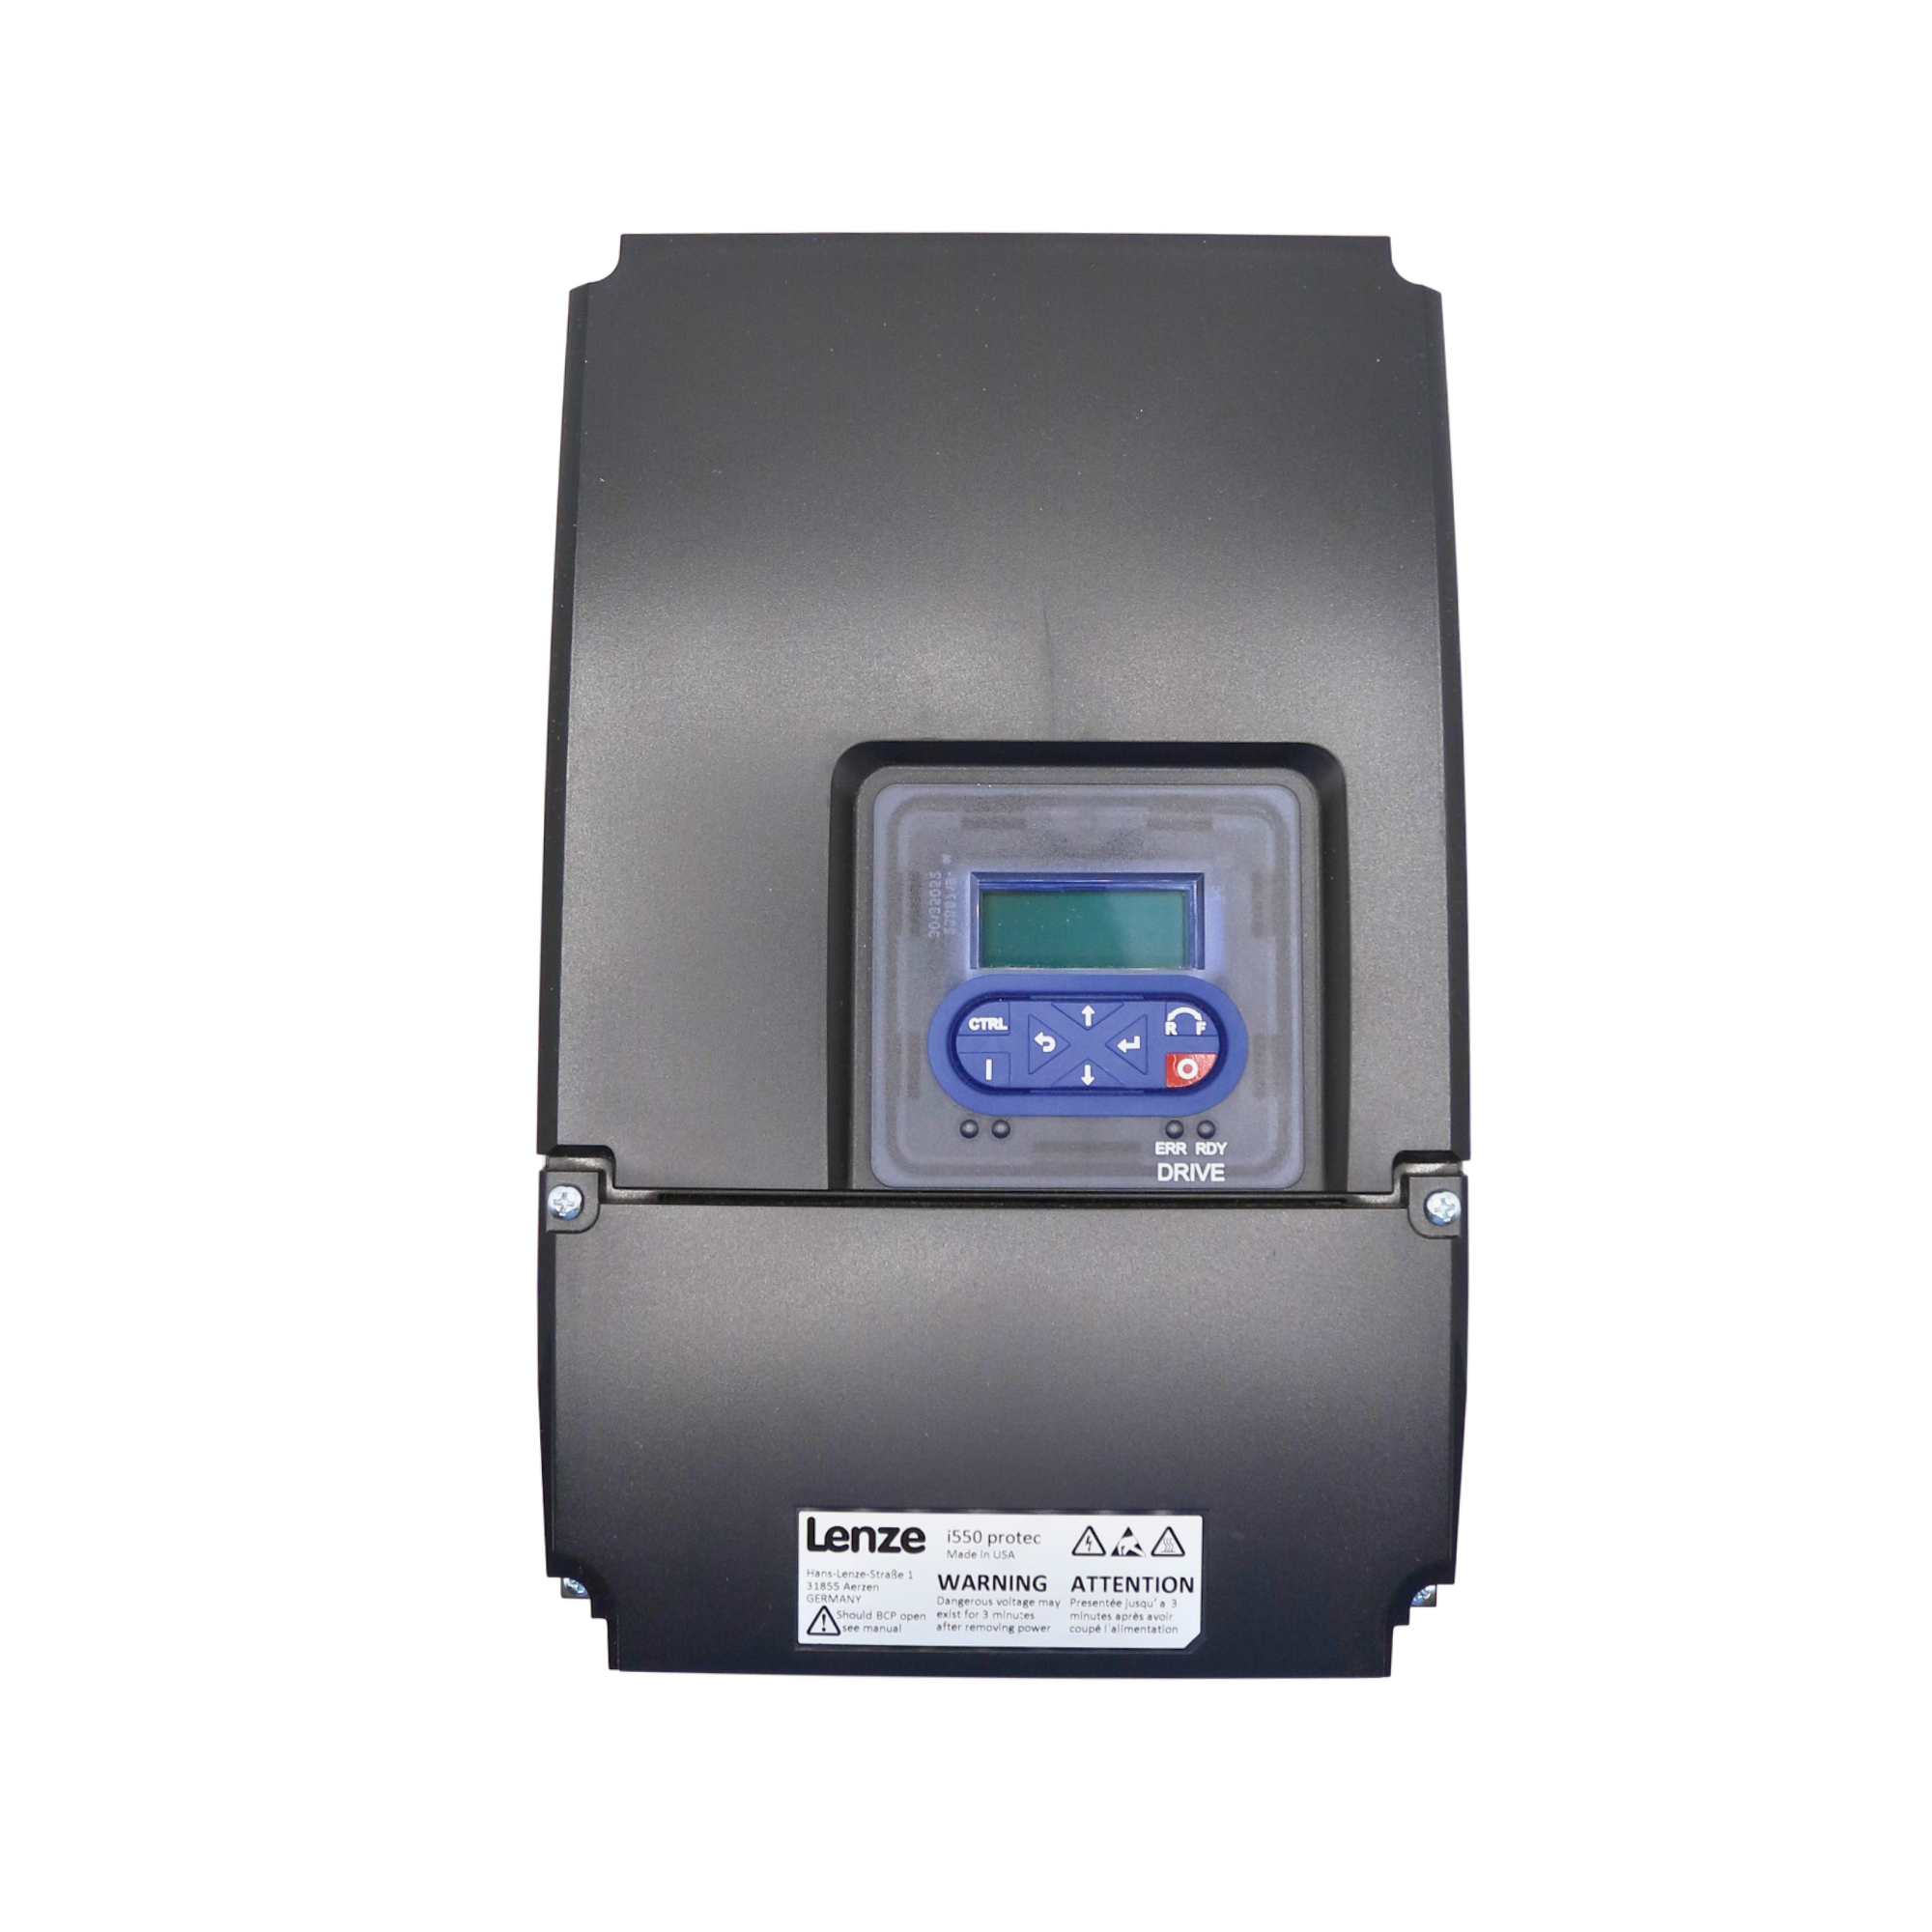 Lenze | I550 Protec 10hp Wall Mount, Nema 4x rated, Keypad, Incremental encoder (HTL) via two digital inputs, 5digital inputs, 2 analog inputs, 1 digital output 1 analog Output, 1 relay | I55AP275F00711K00S - front view